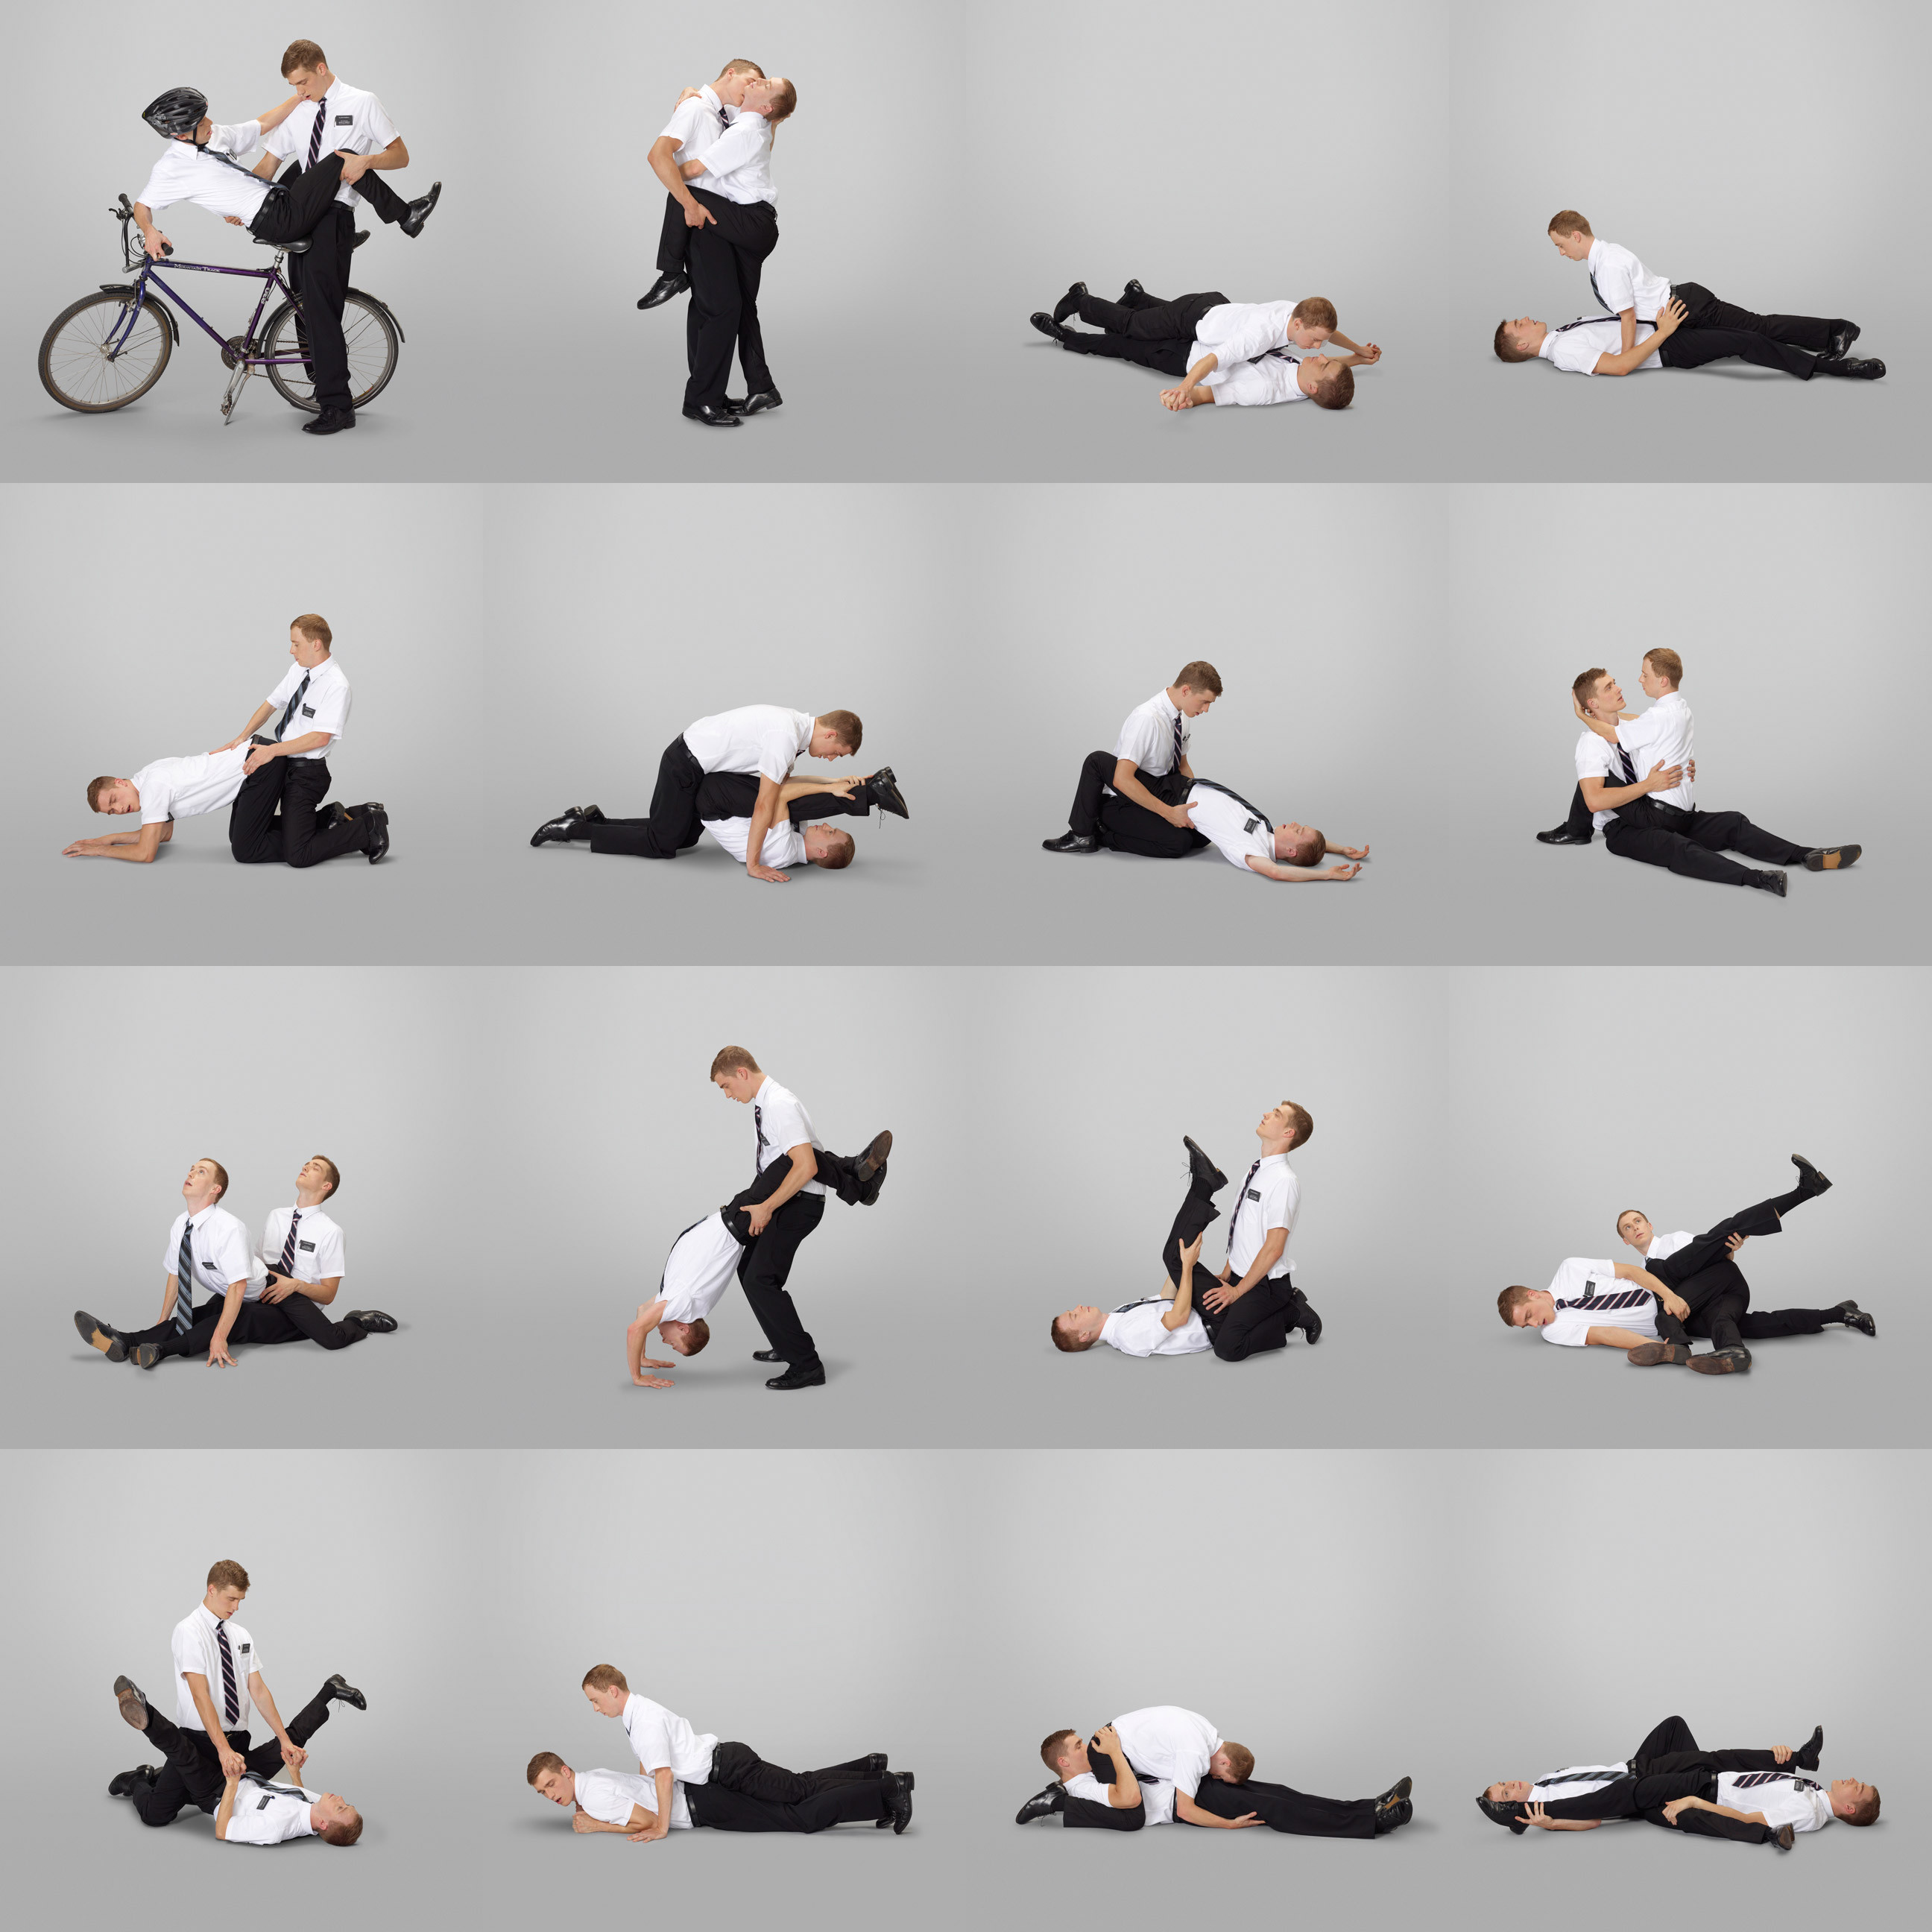 Light Y. reccomend The missionary position play